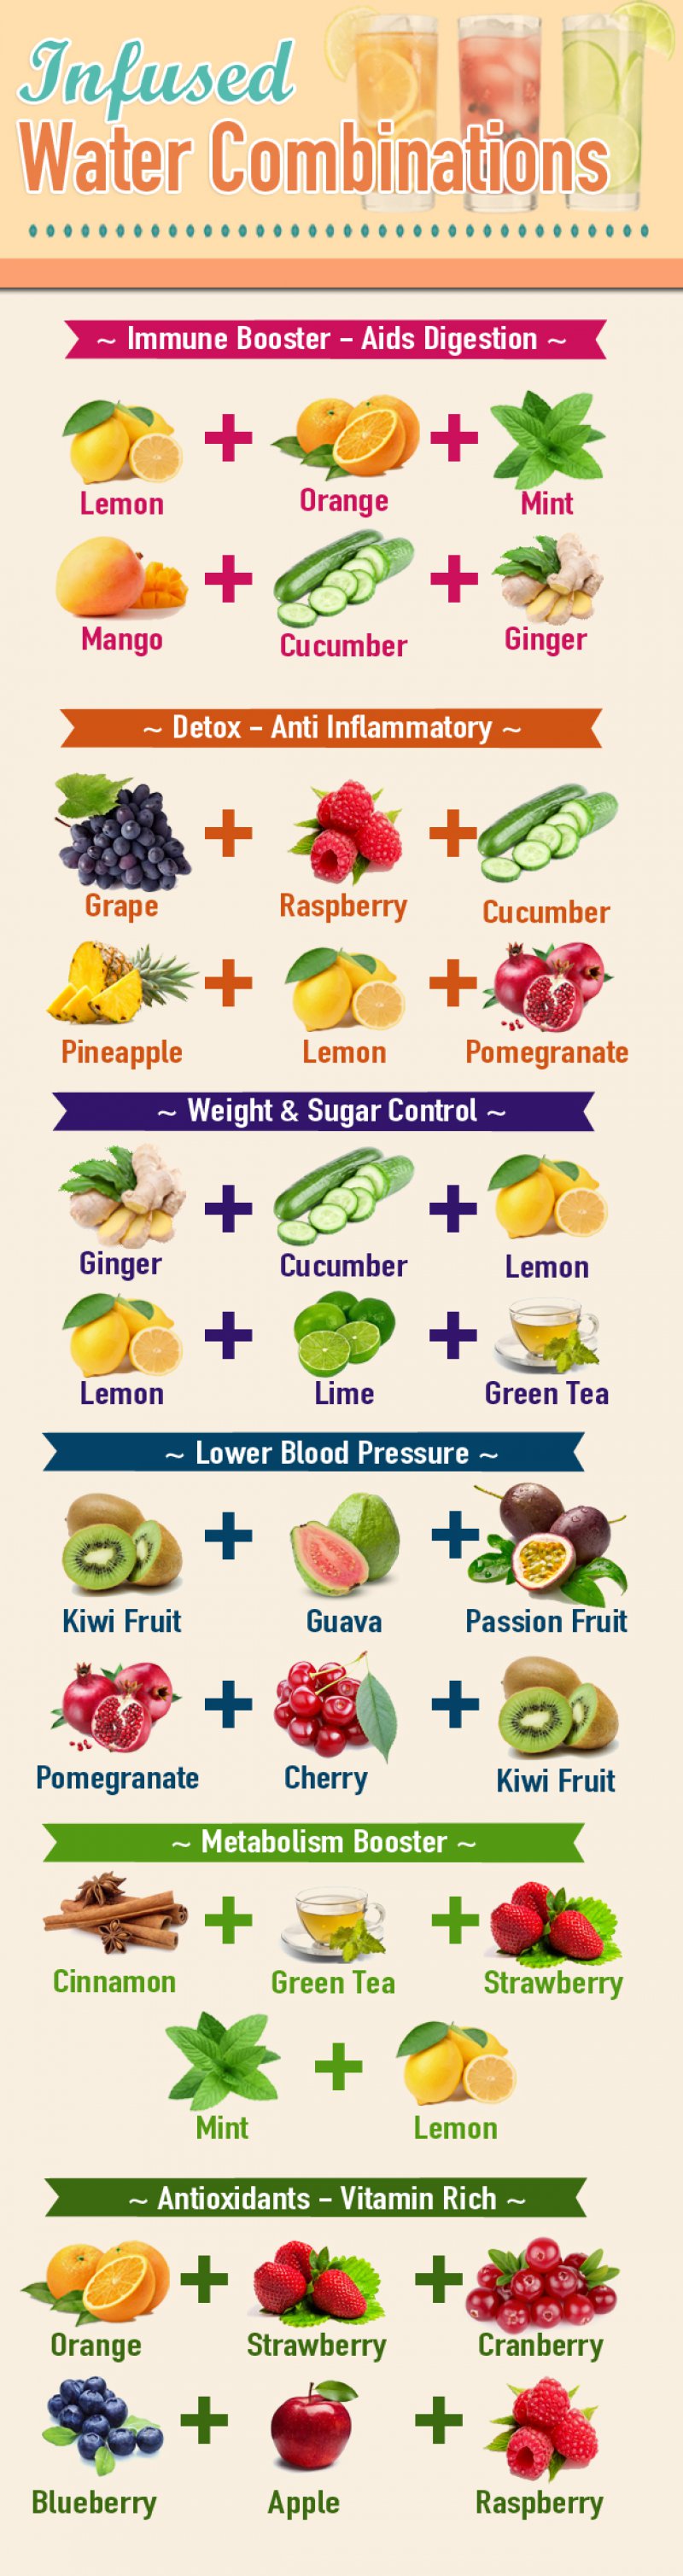 fruit infused water recipes infographic